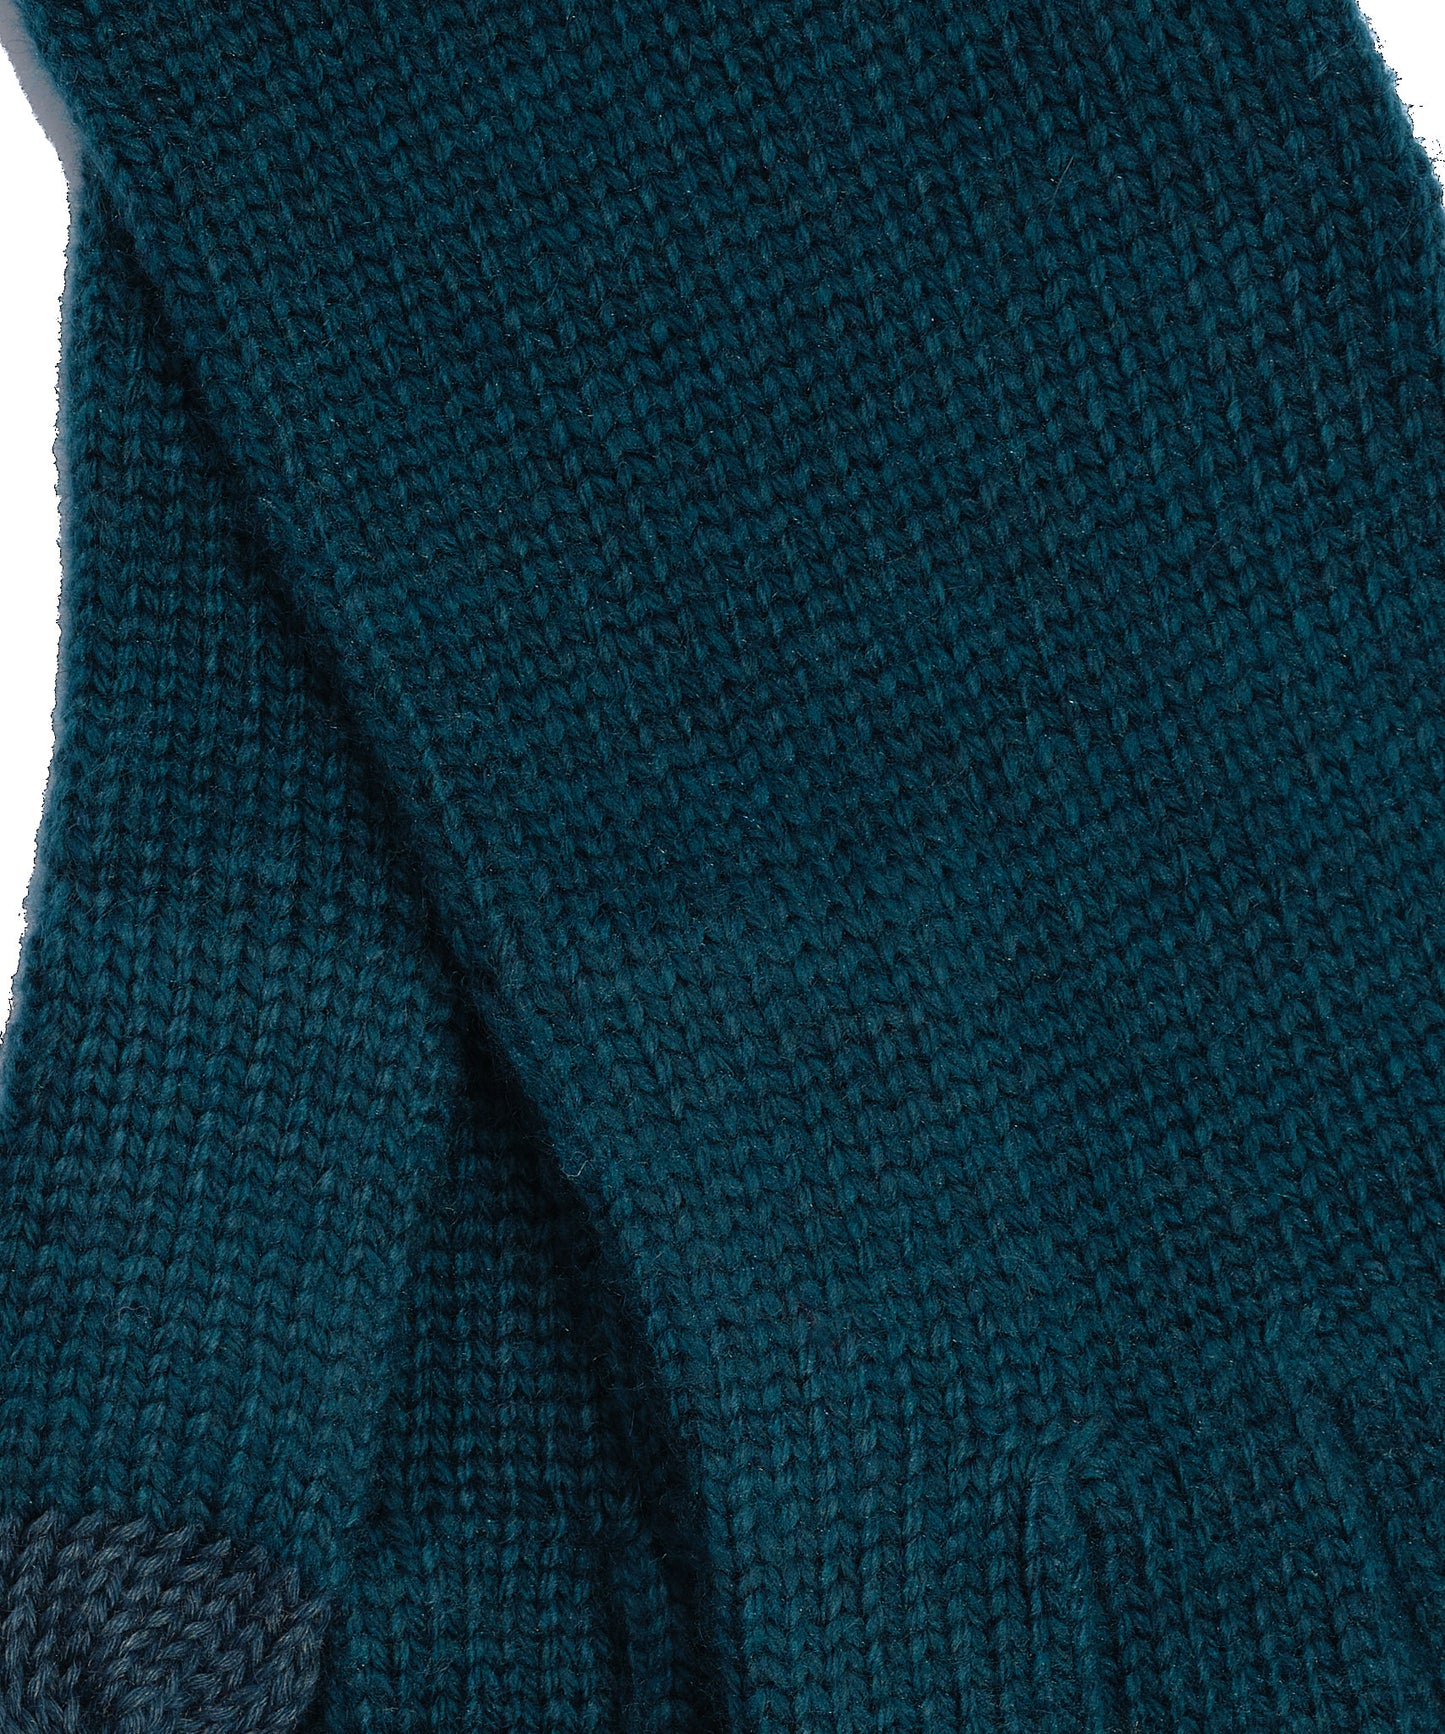 Echo Touch Glove in color Deep Teal